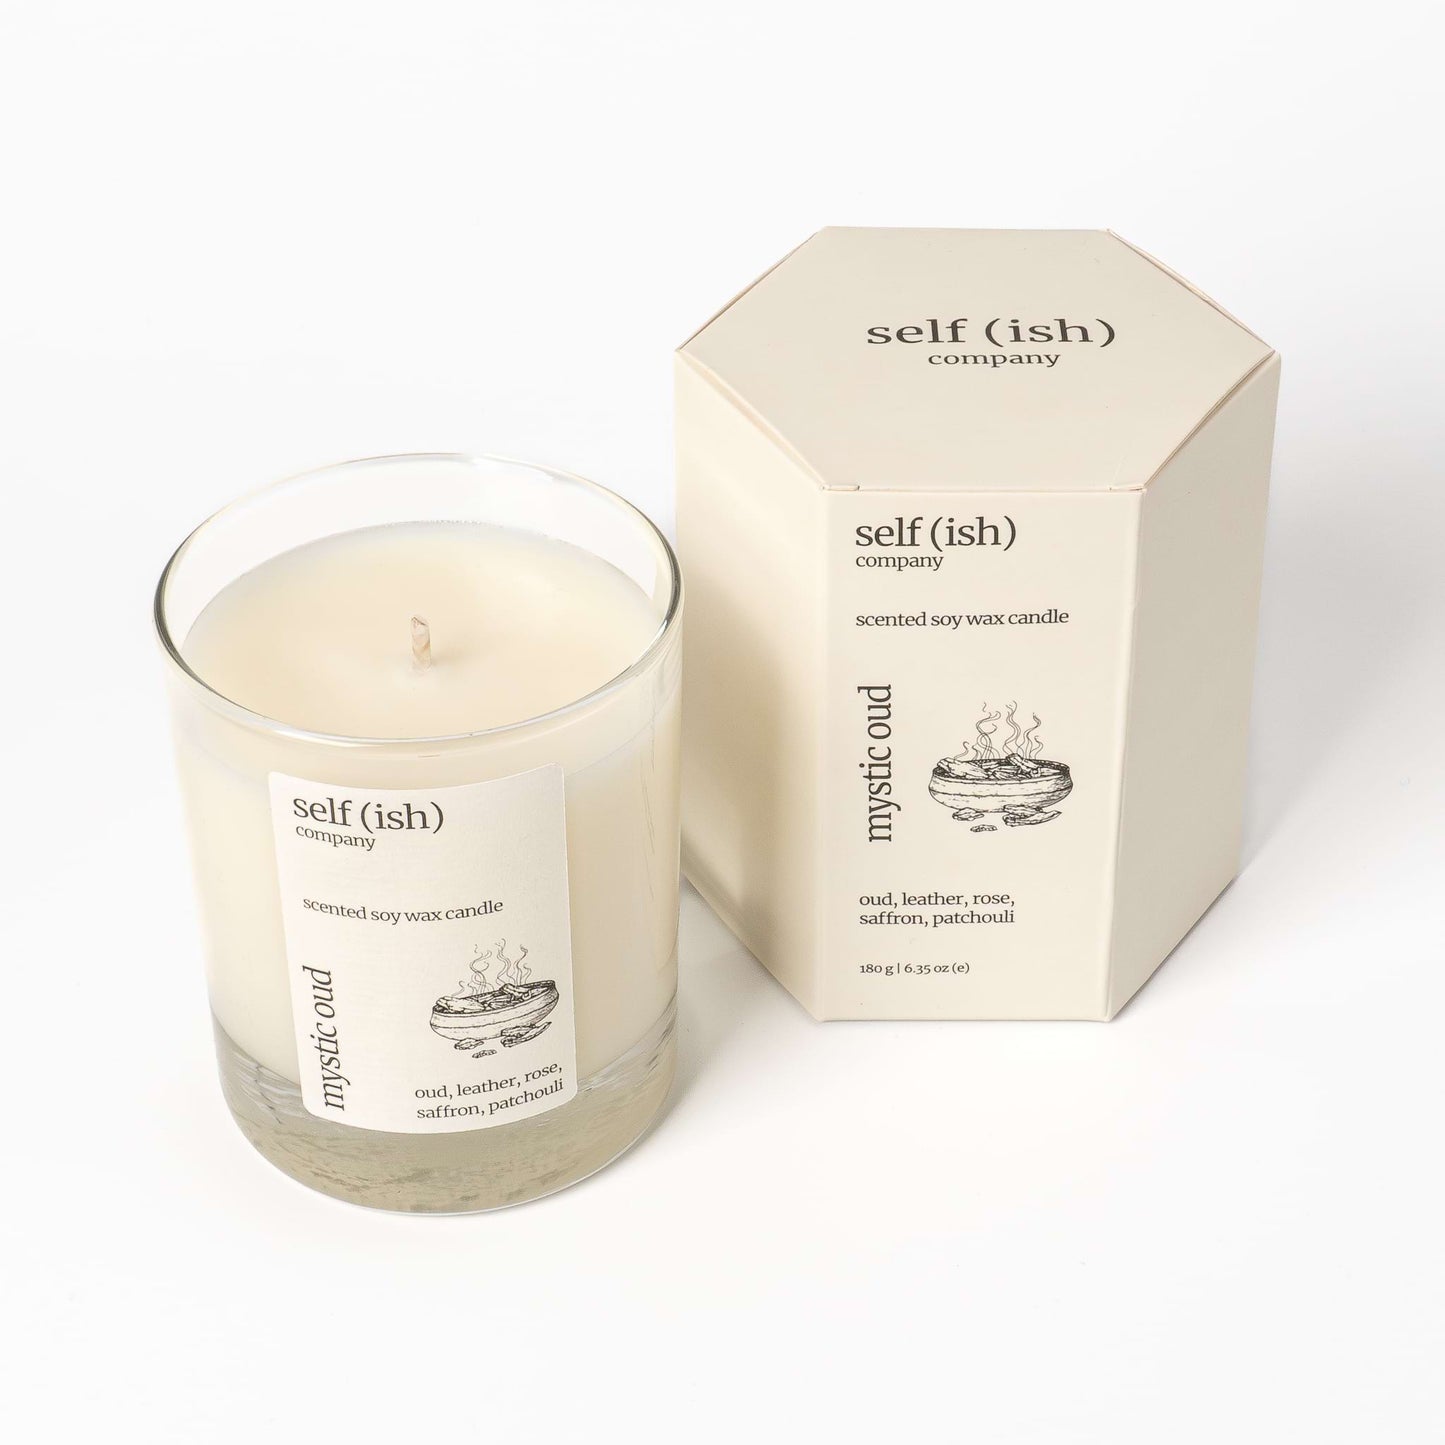 oud soy wax candle with gift packaging for sale in the UK, 100% natural luxury soy candle to buy online from the best candle company in England, paraffin free candle, artisan candle